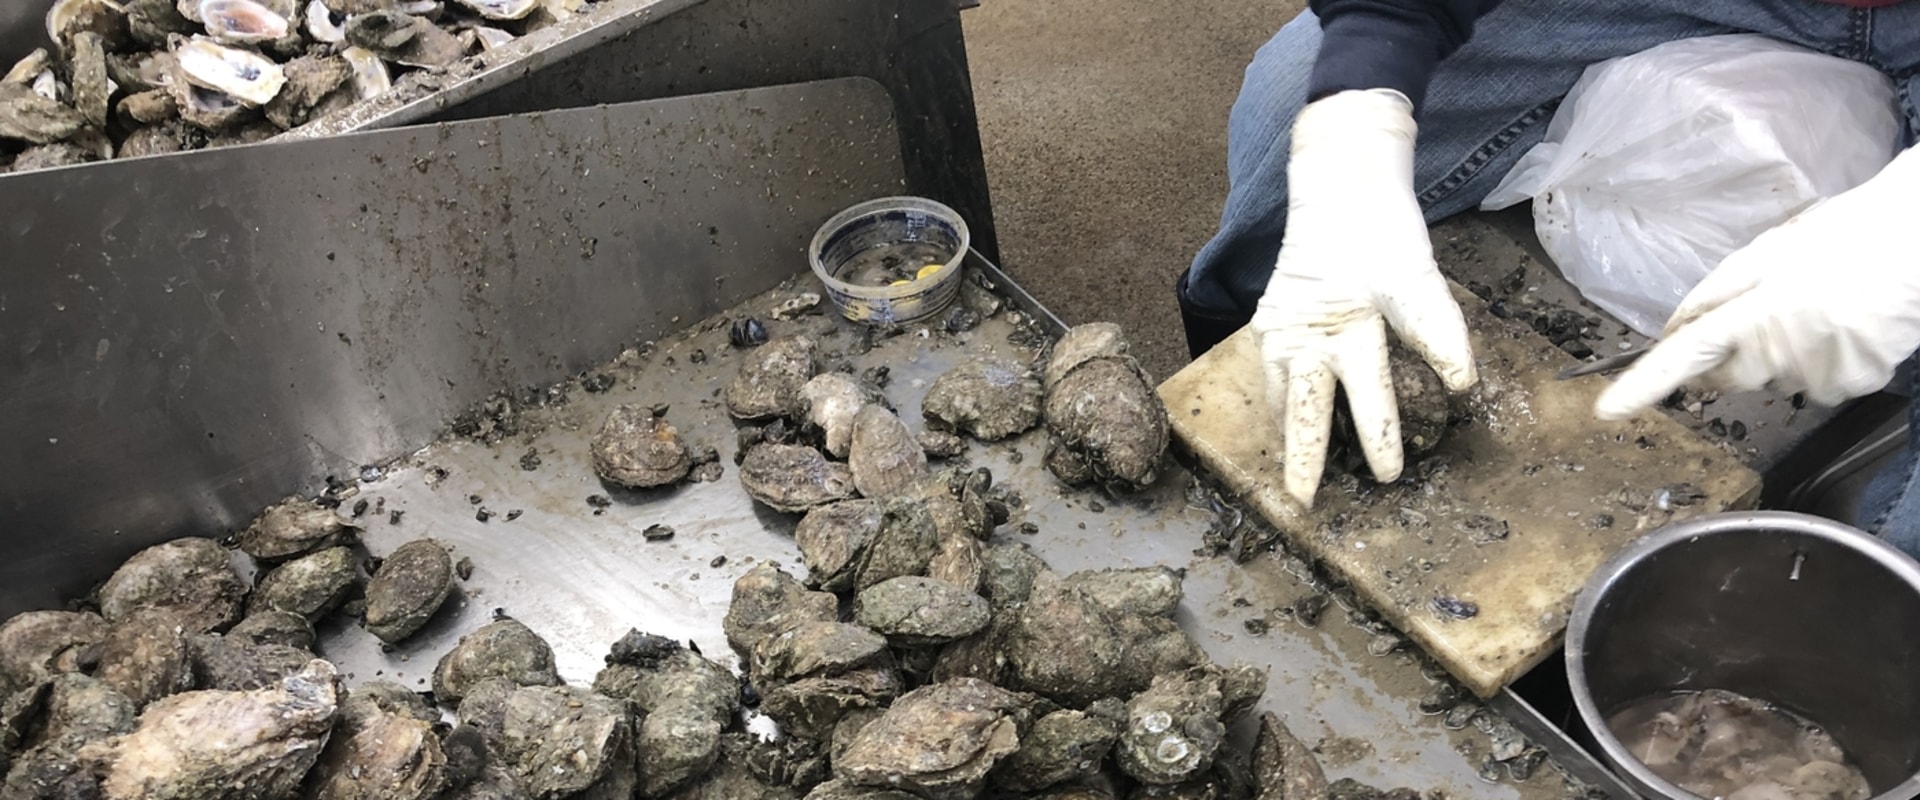 The Oyster Revolution: How the Industry is Transforming Fairhope, Alabama's Local Economy